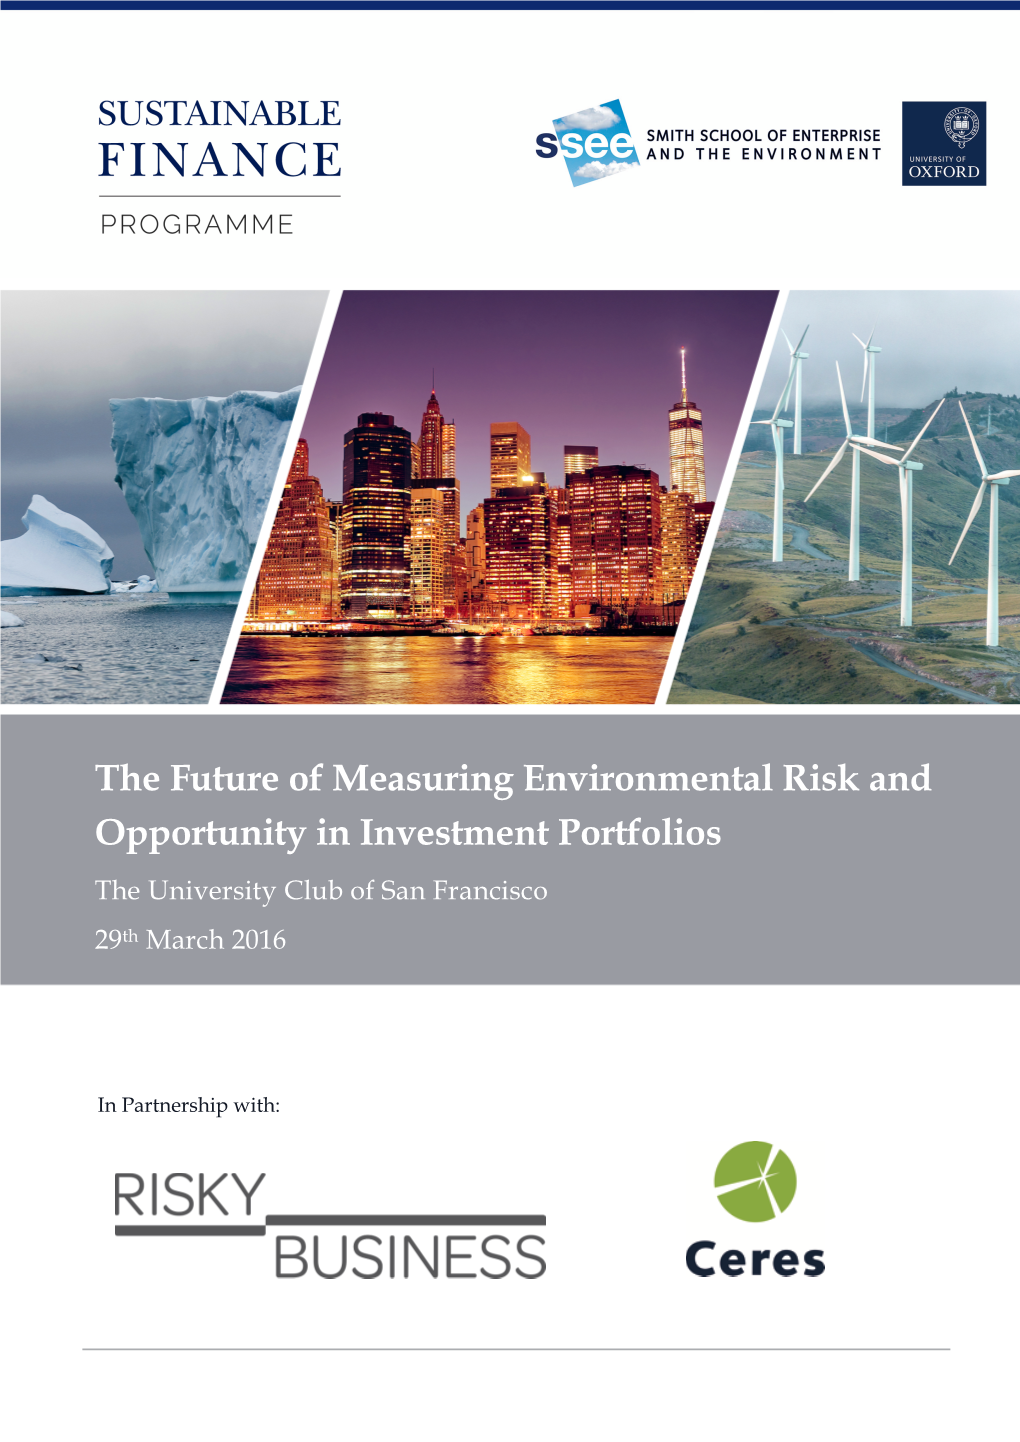 The Future of Measuring Environmental Risk and Opportunity in Investment Portfolios the University Club of San Francisco 29Th March 2016